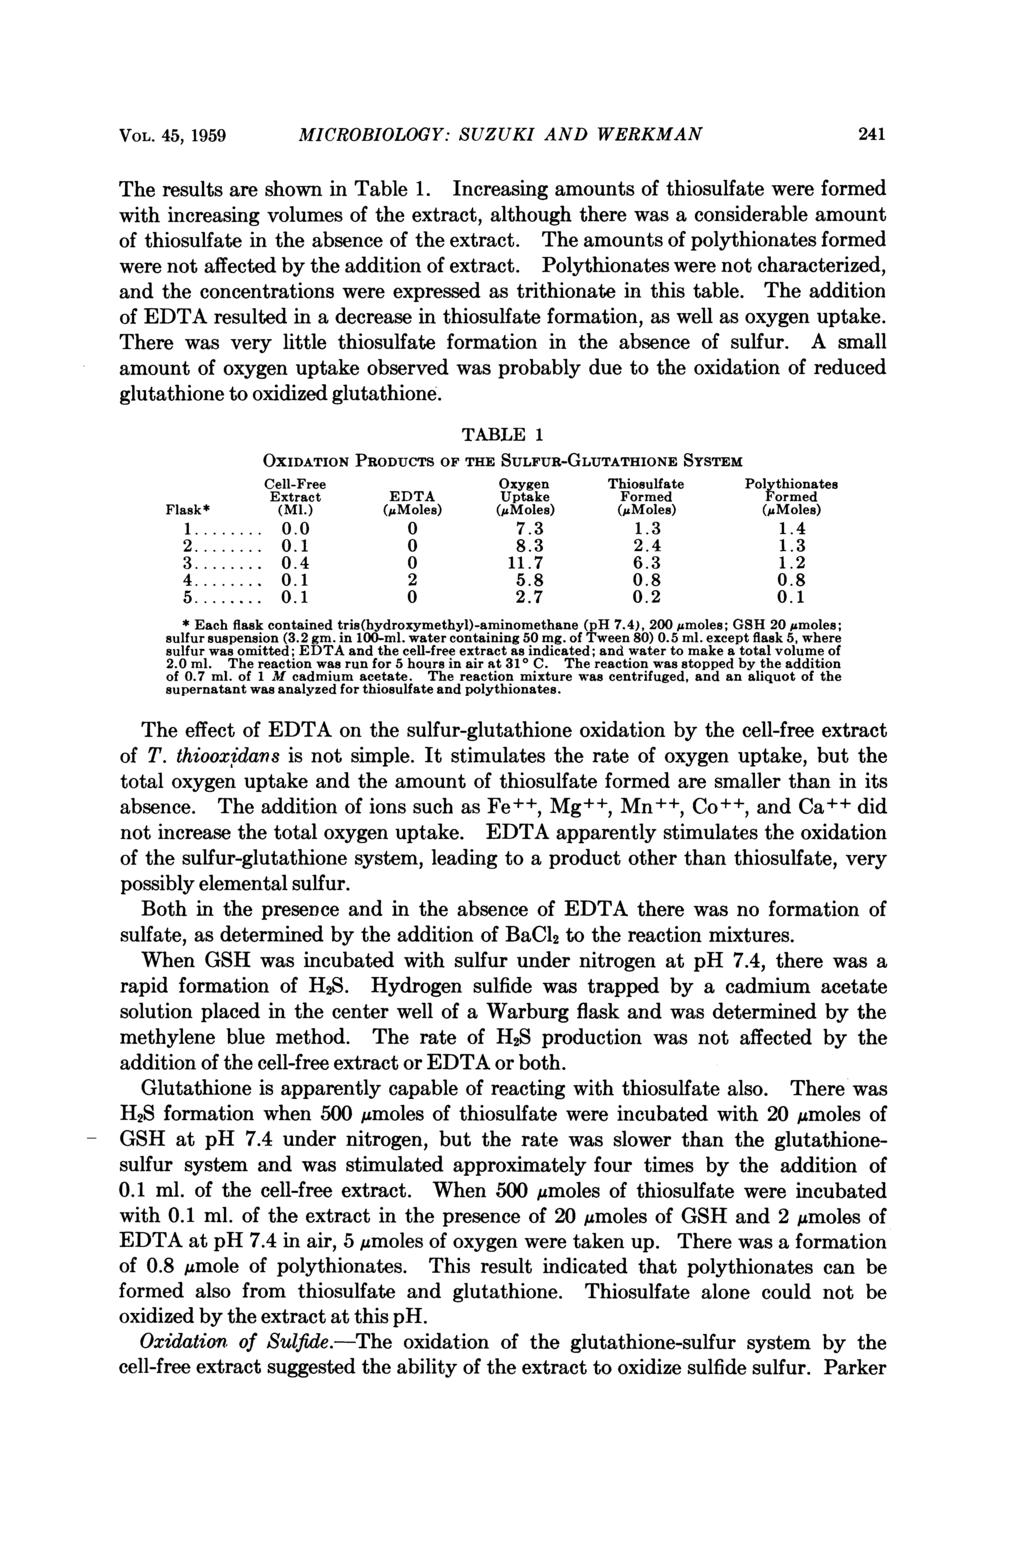 VOL. 45, 1959 MICROBIOLOGY: SUZUKI AND WERKMAN 241 The results are shown in Table 1.